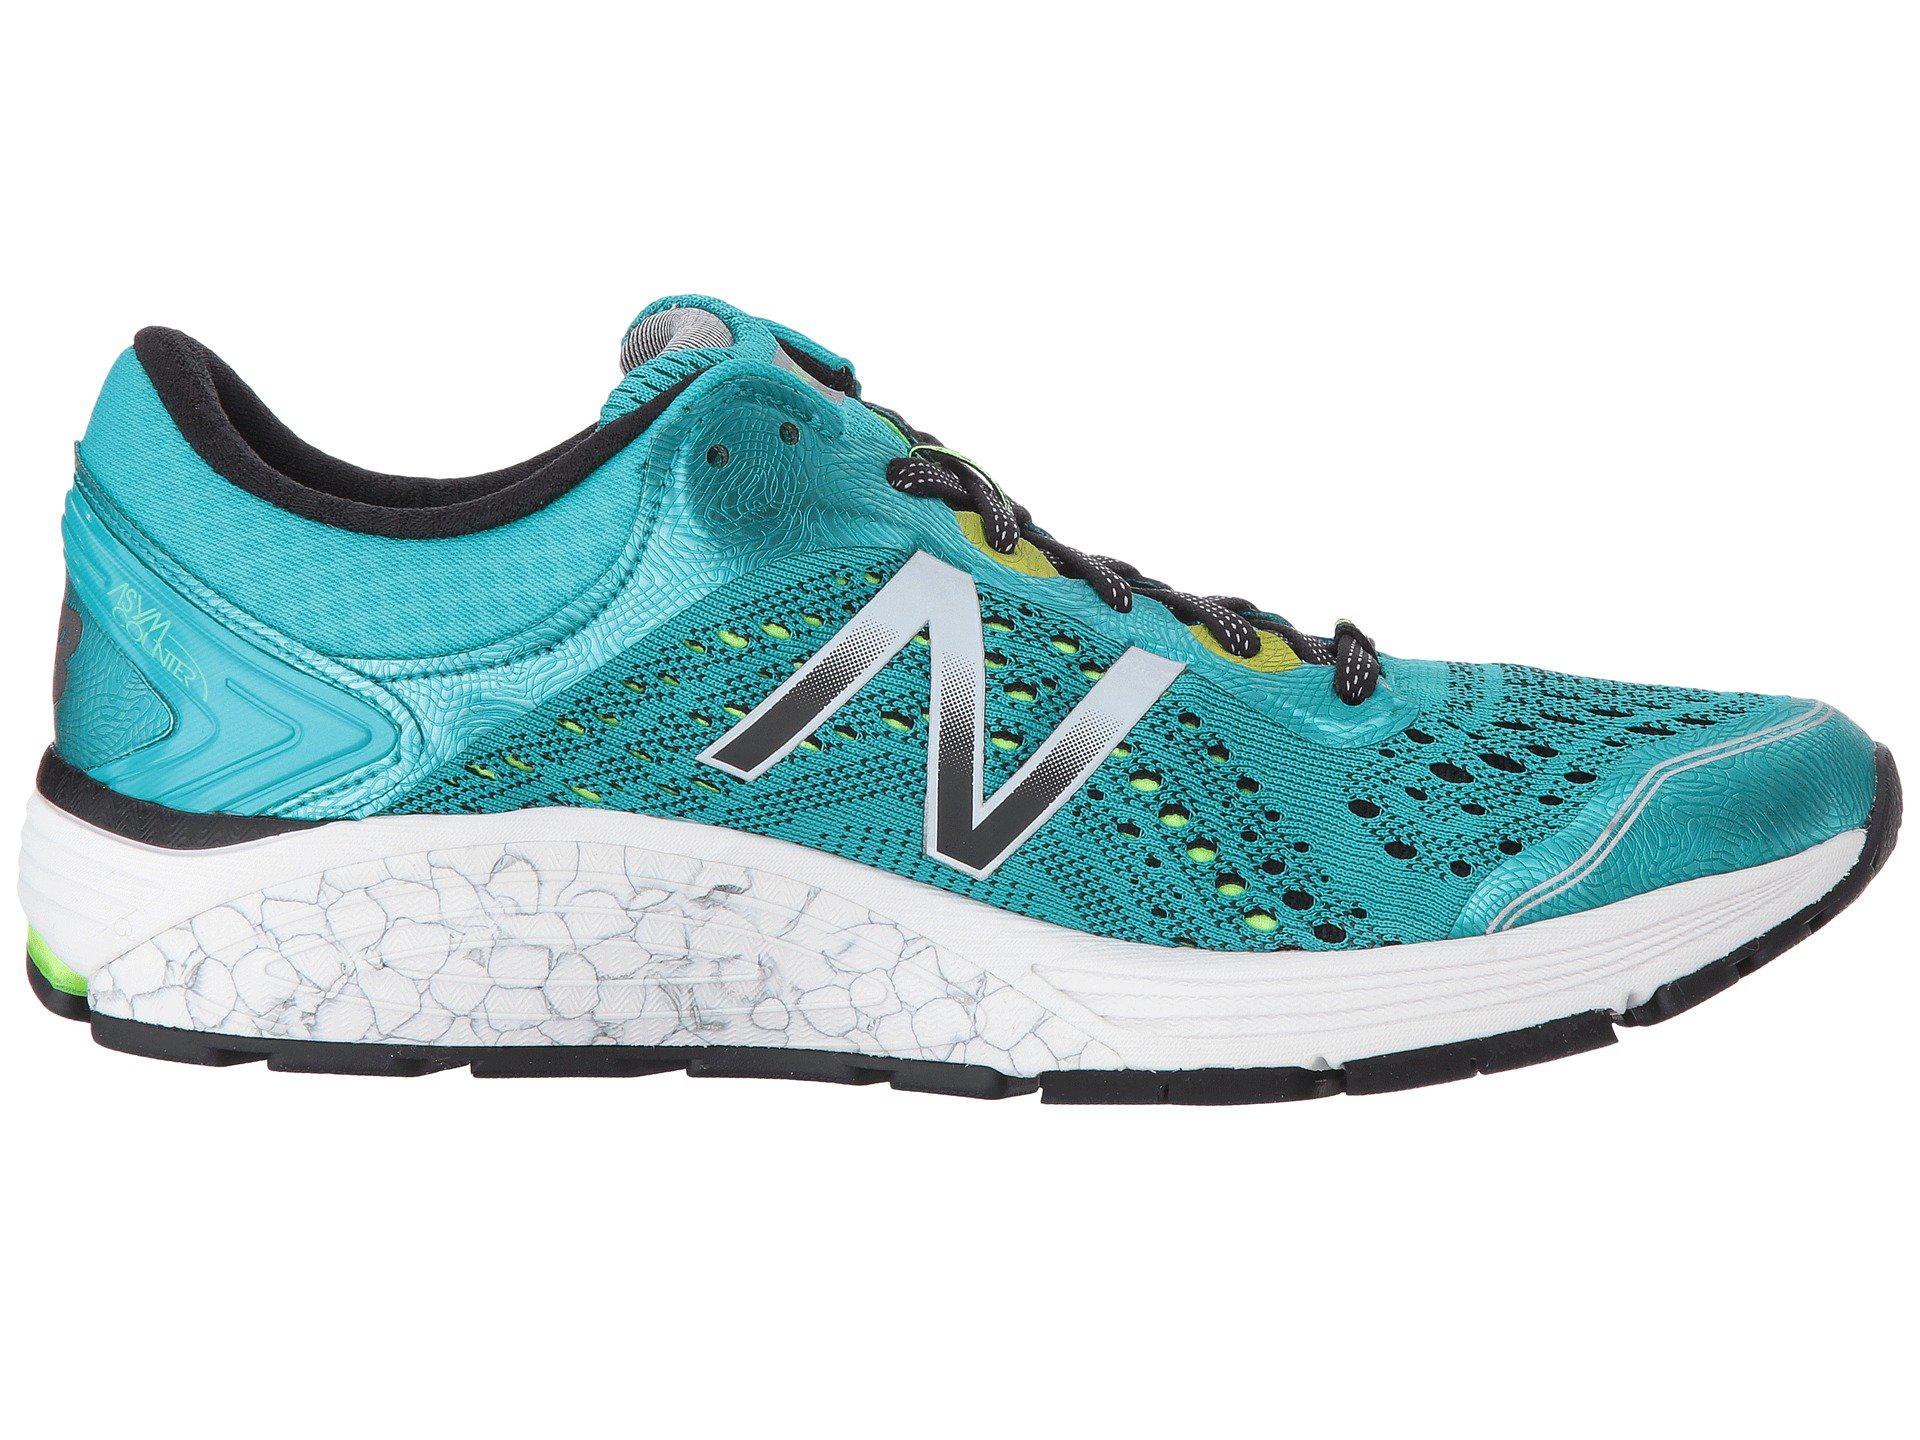 New Balance Synthetic 1260 V7 (polaris/pigment) Women's Running Shoes ...